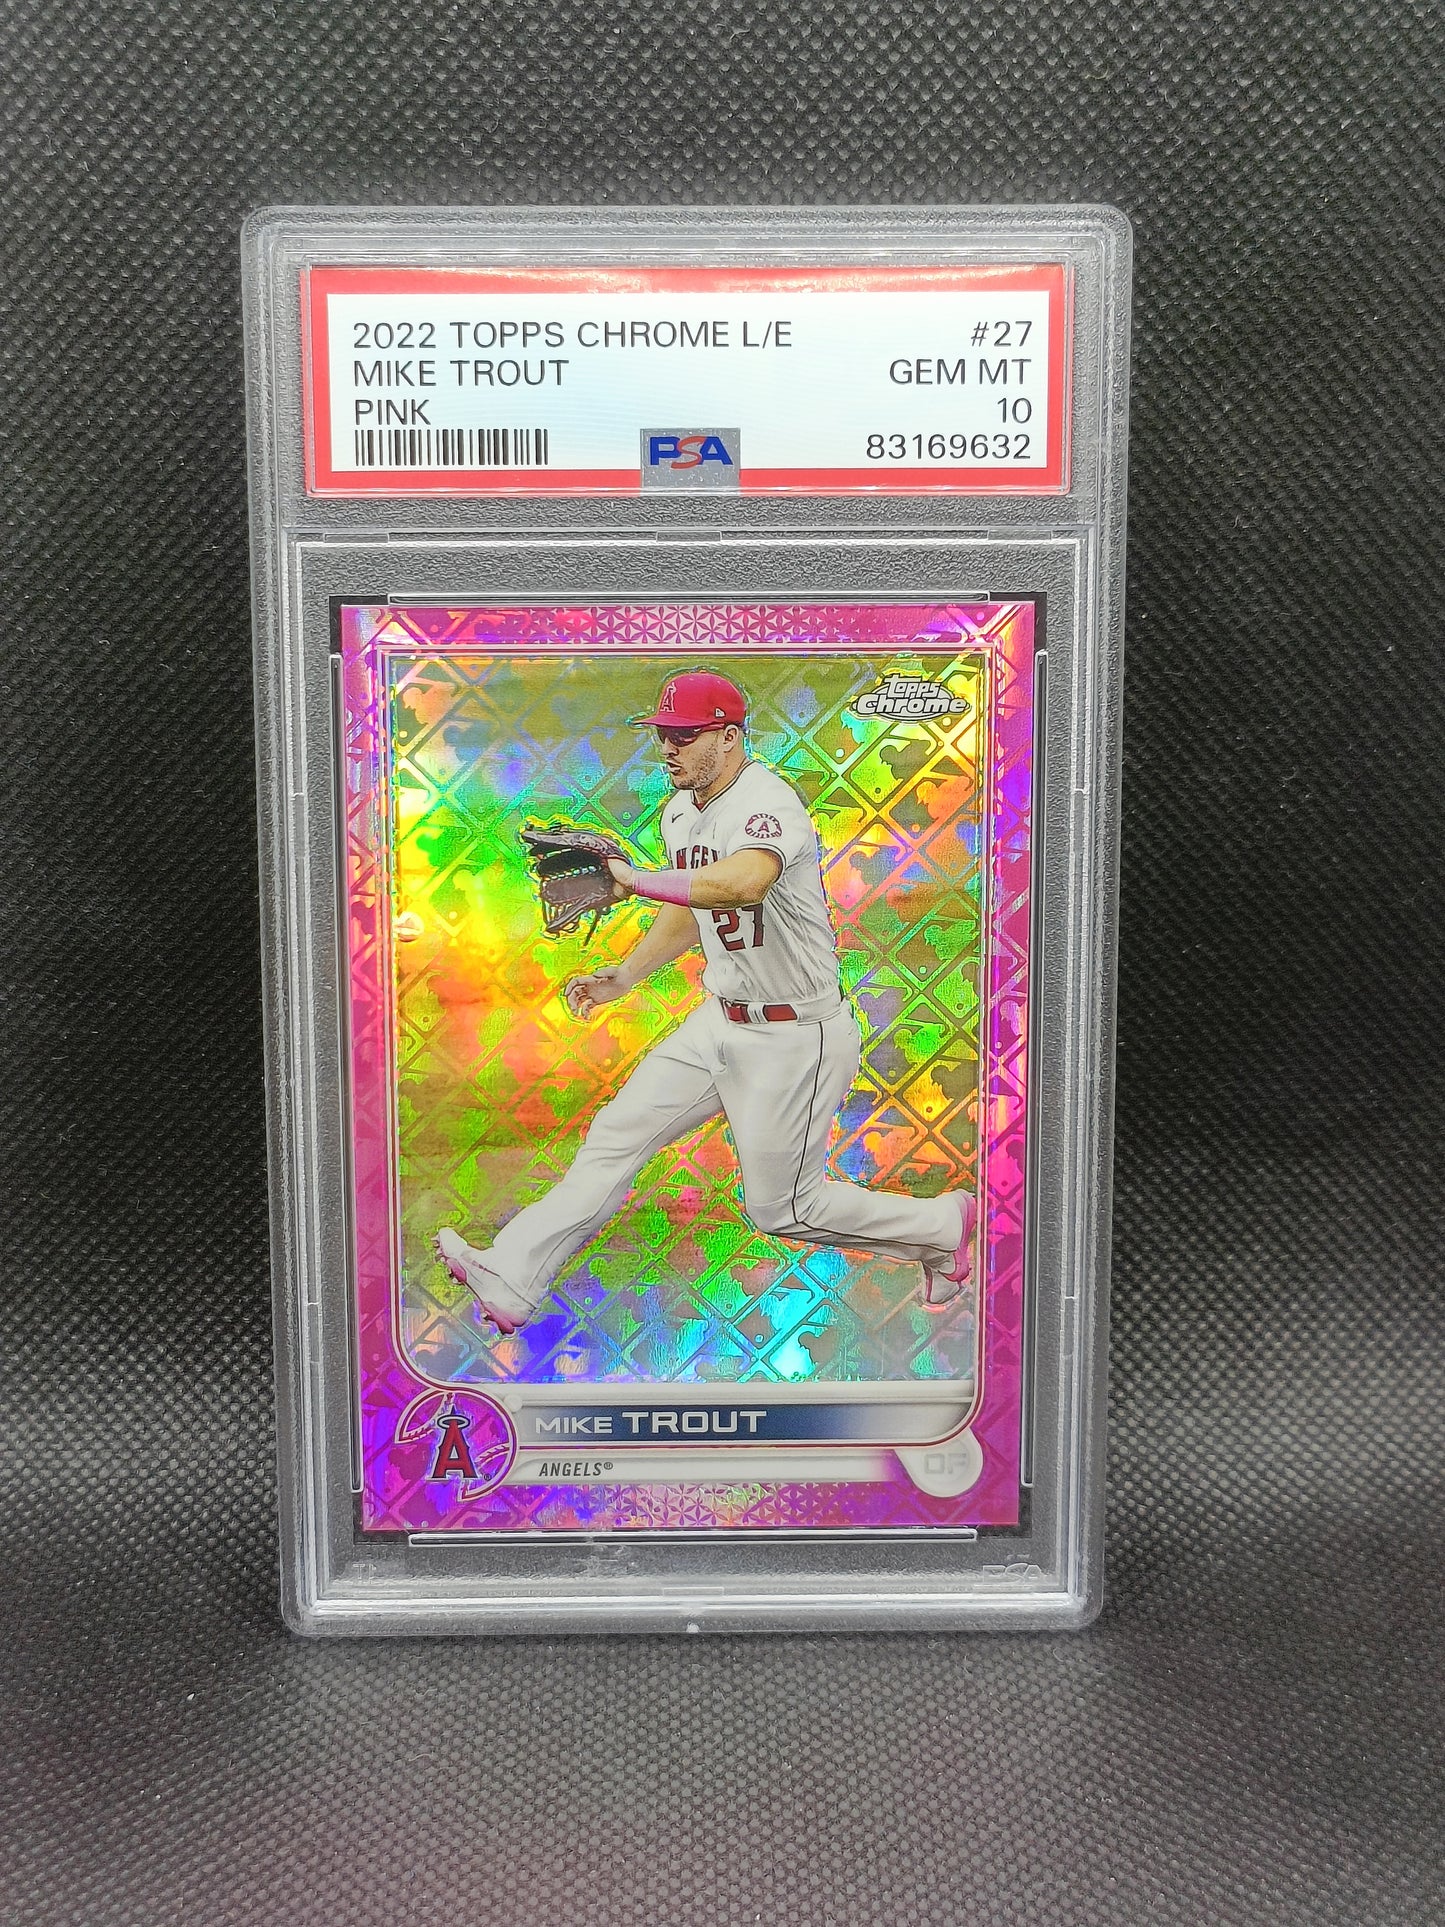 Mike Trout - 2022 Topps Chrome Logofractor Edition Pink #/199 - PSA 10 - LA Angels